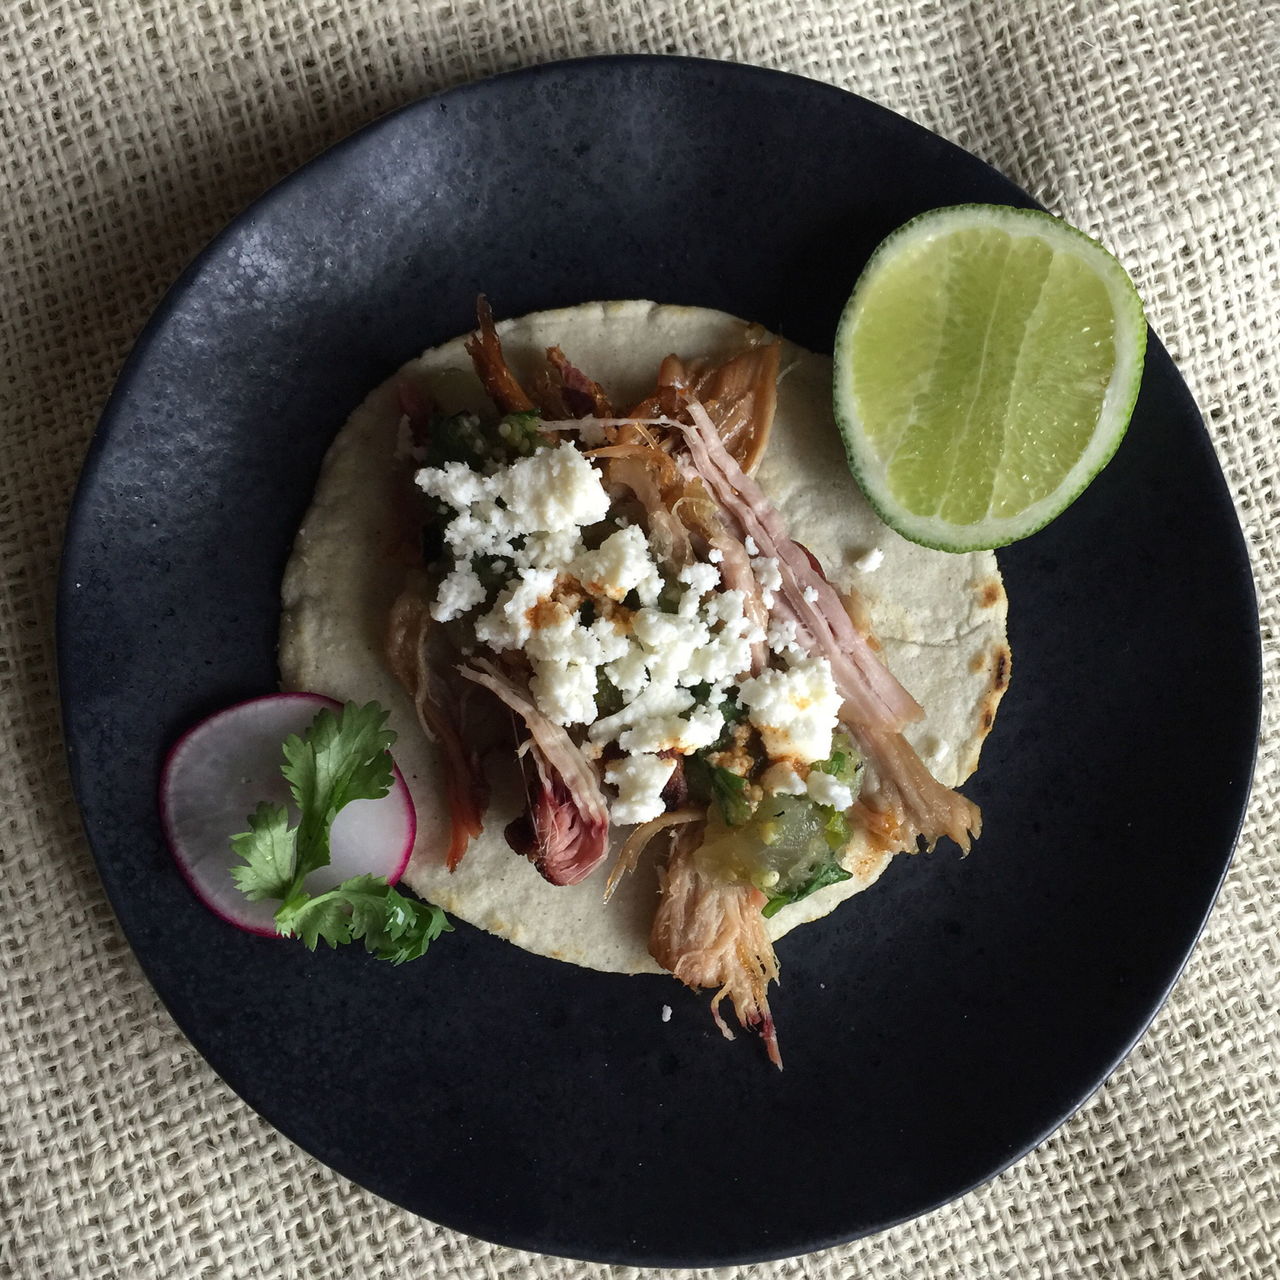 Make your own corn tortilla and add store-bought smoked chicken, plus salsa verde and queso fresco for a fast, tasty meal.